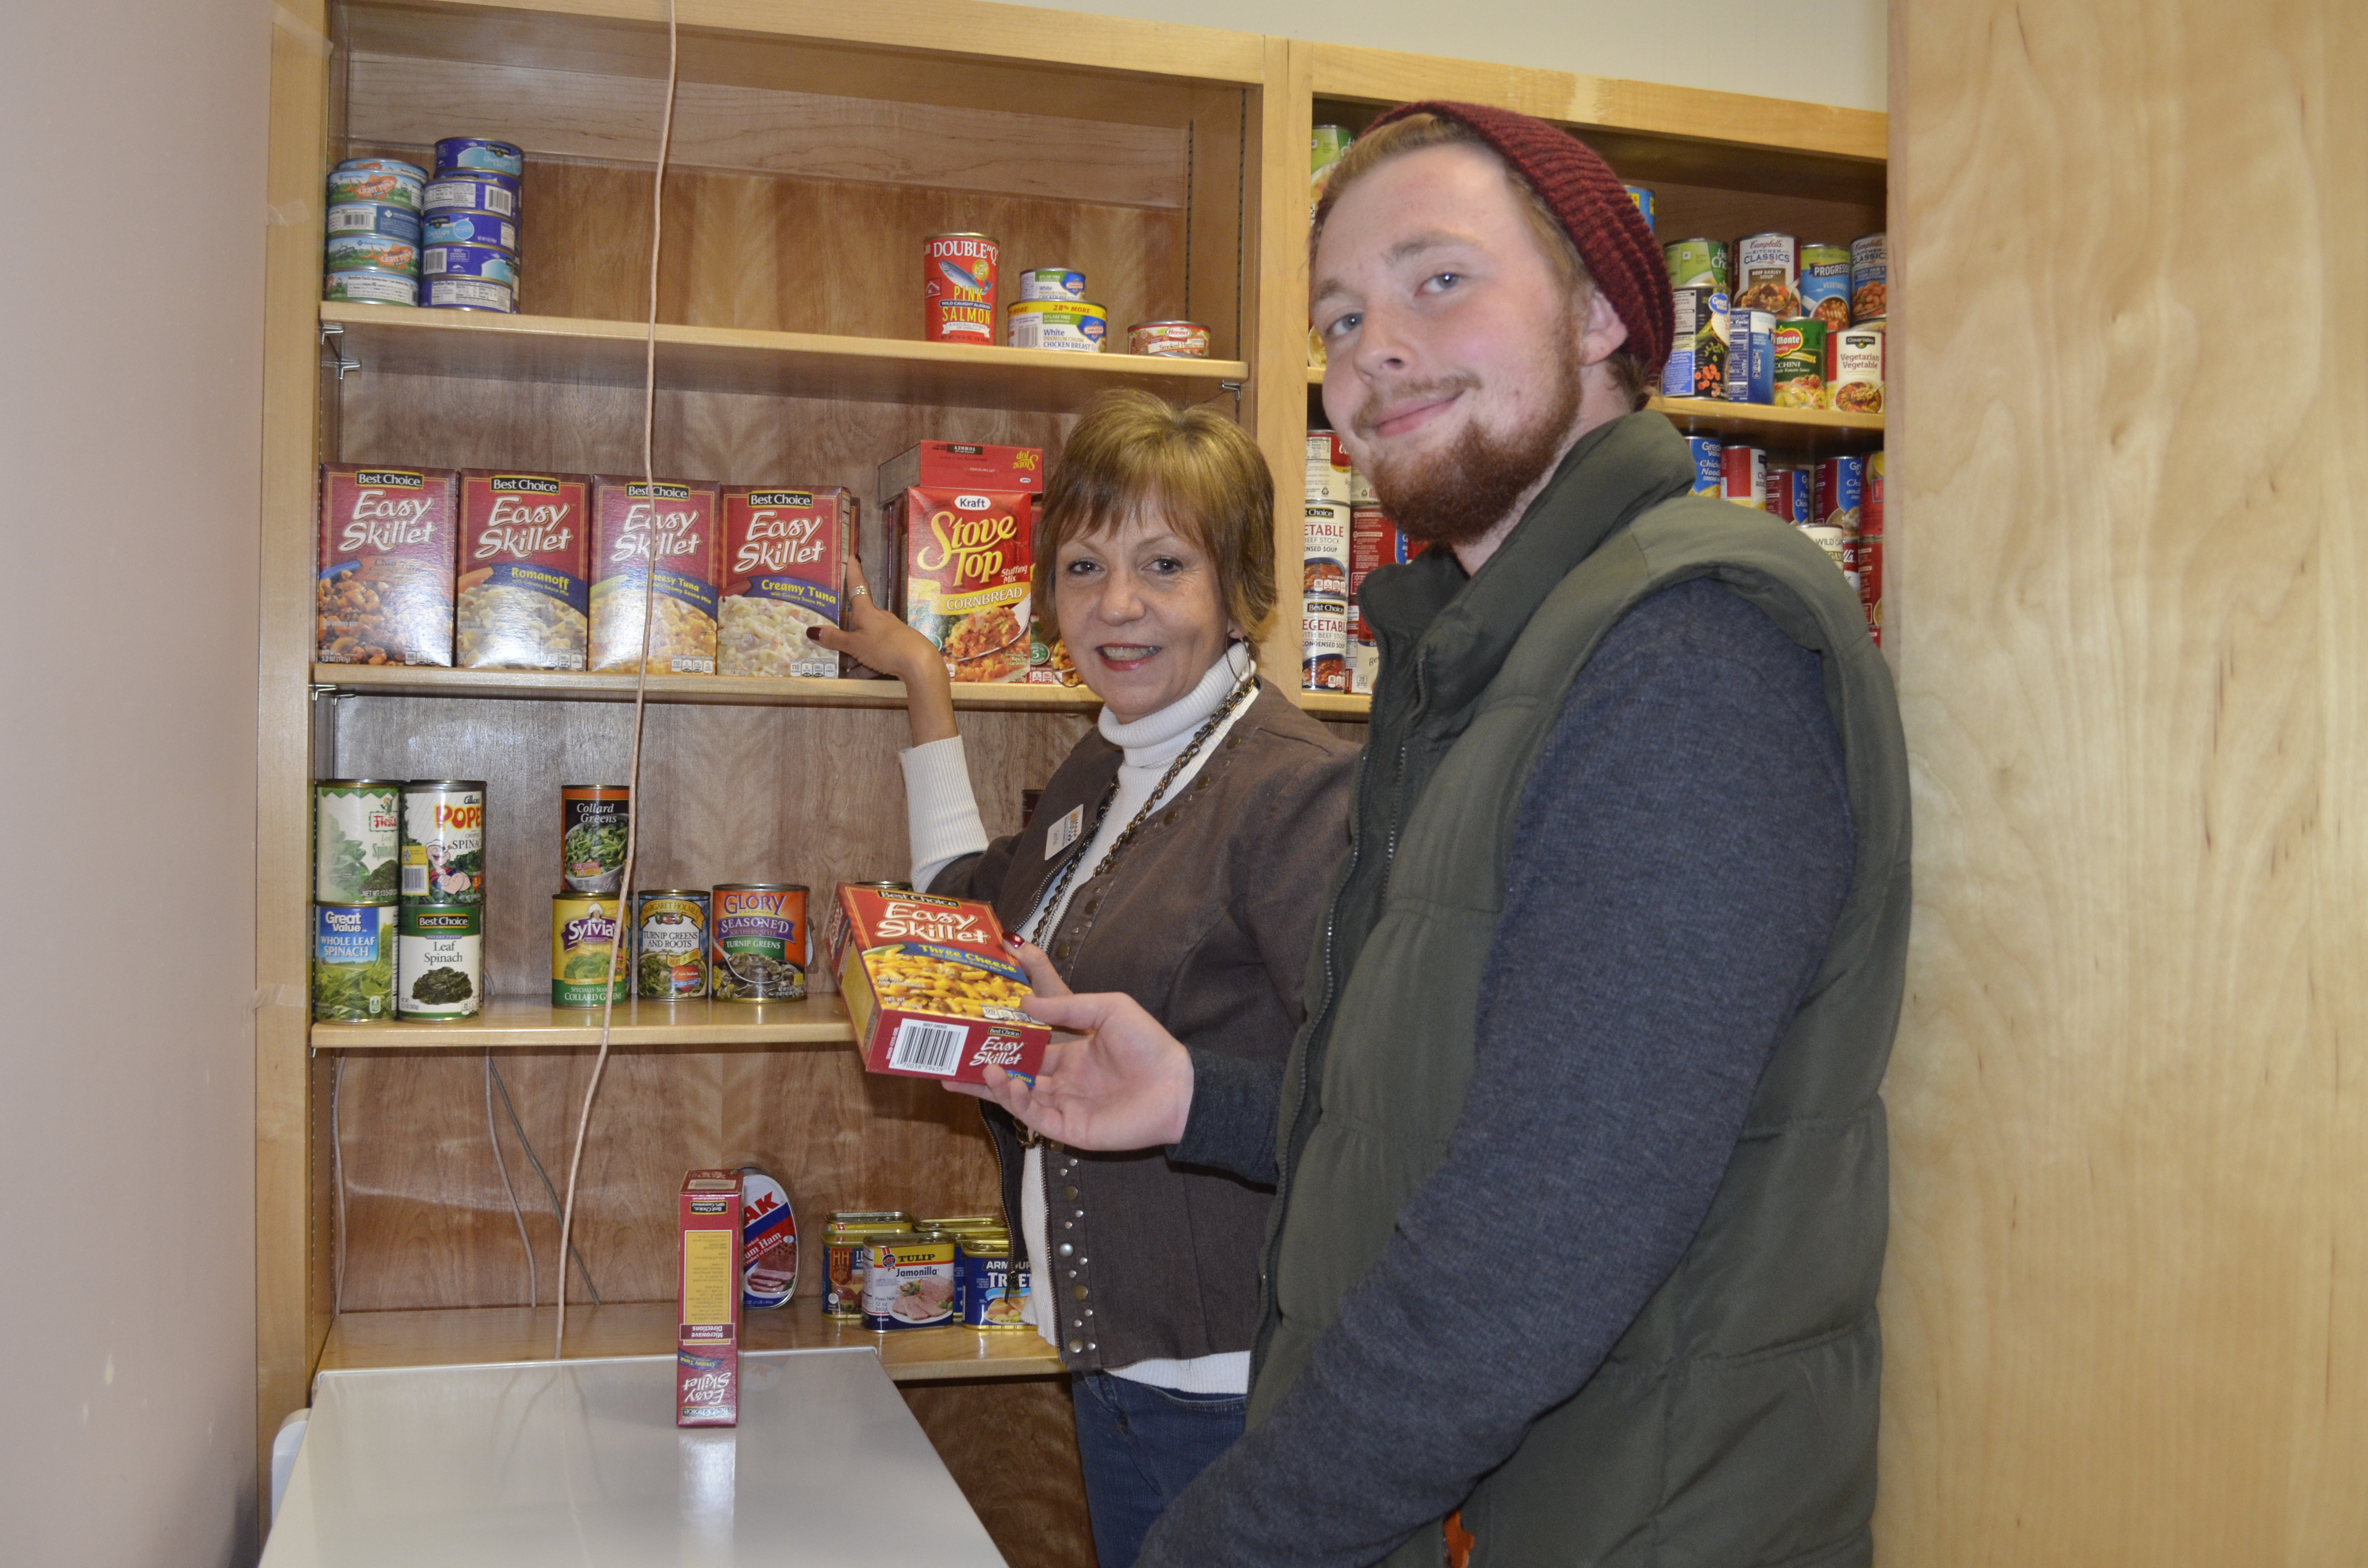 Carin Platt and Jake Franks putting items on the shelf in the food pantry